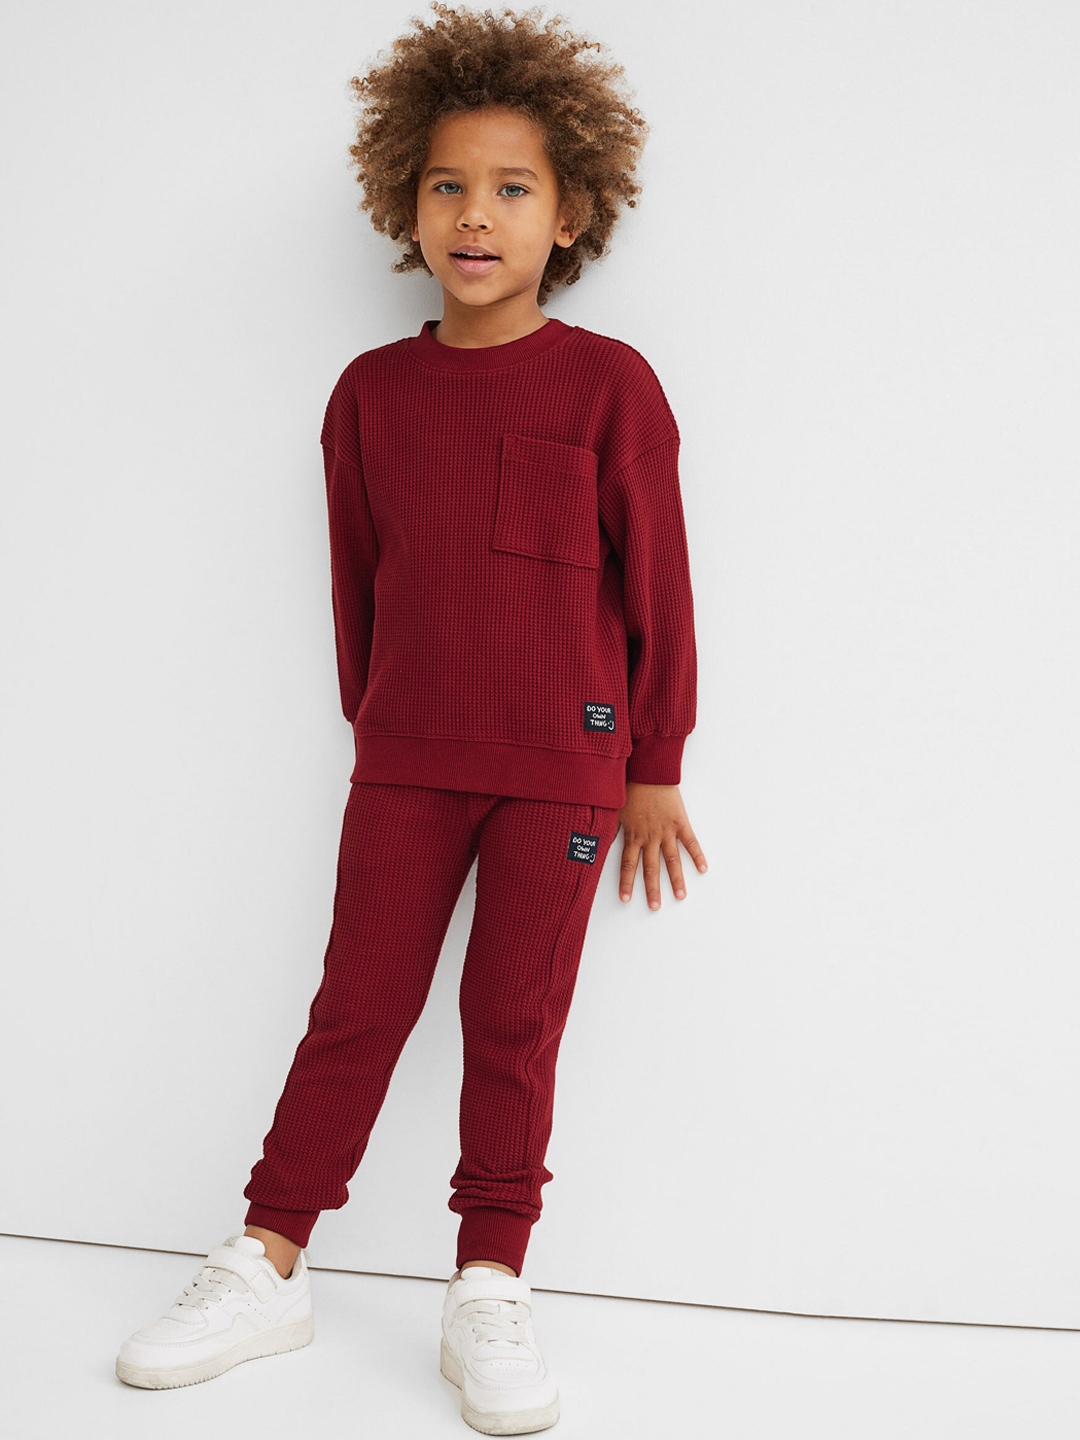 Buy H&M Kids Boys Red 2 Piece Cotton Set - Clothing Set for Boys ...